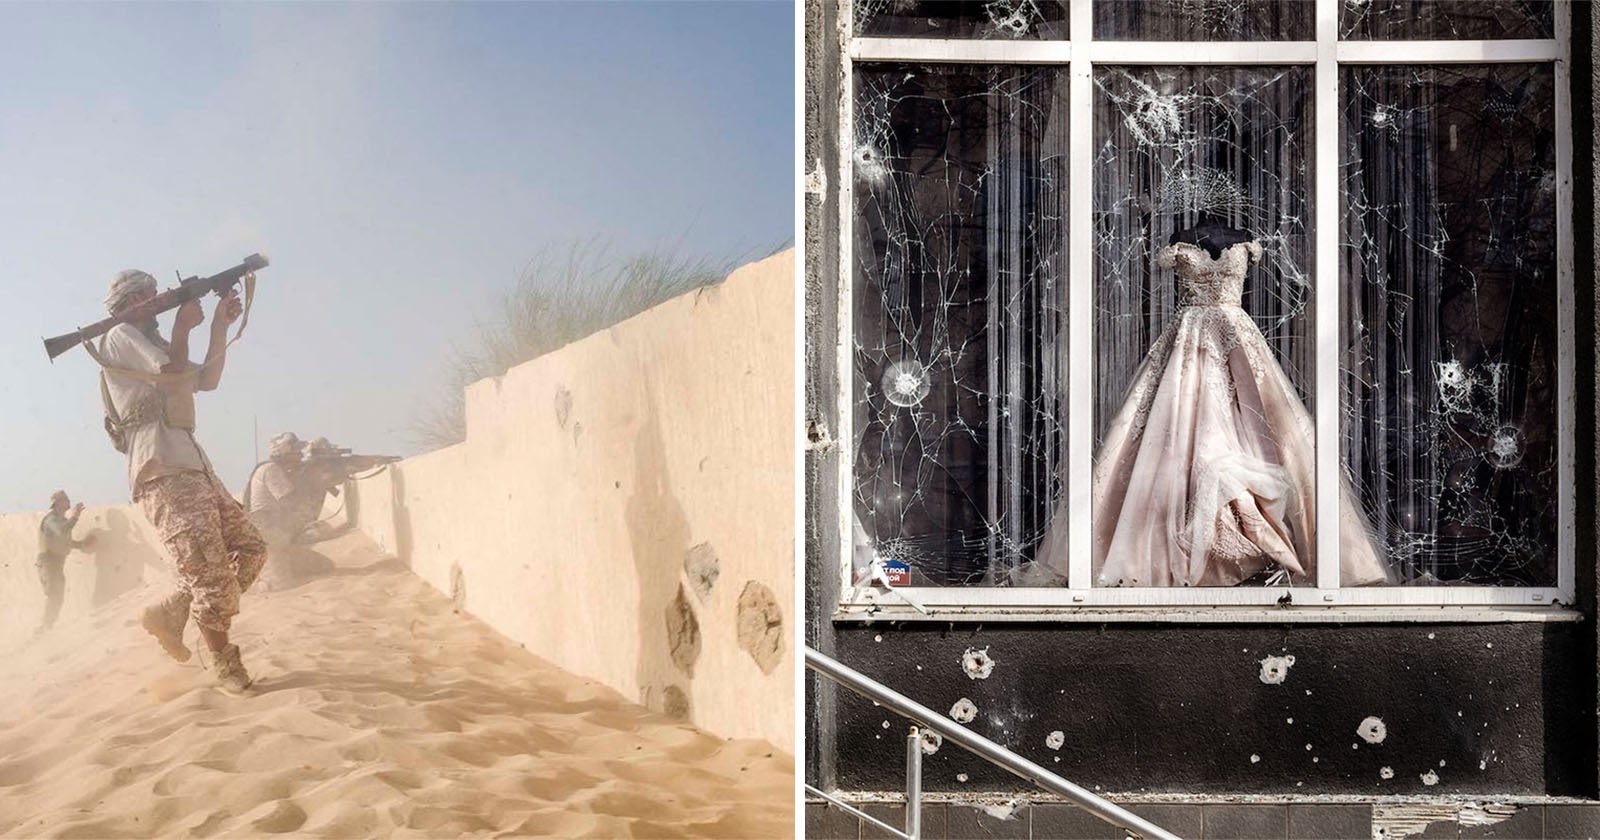 A split image showing contrasting scenes: on the left, a soldier firing a rocket launcher in a sandy desert; on the right, a bullet-riddled window displaying an elegant dress.